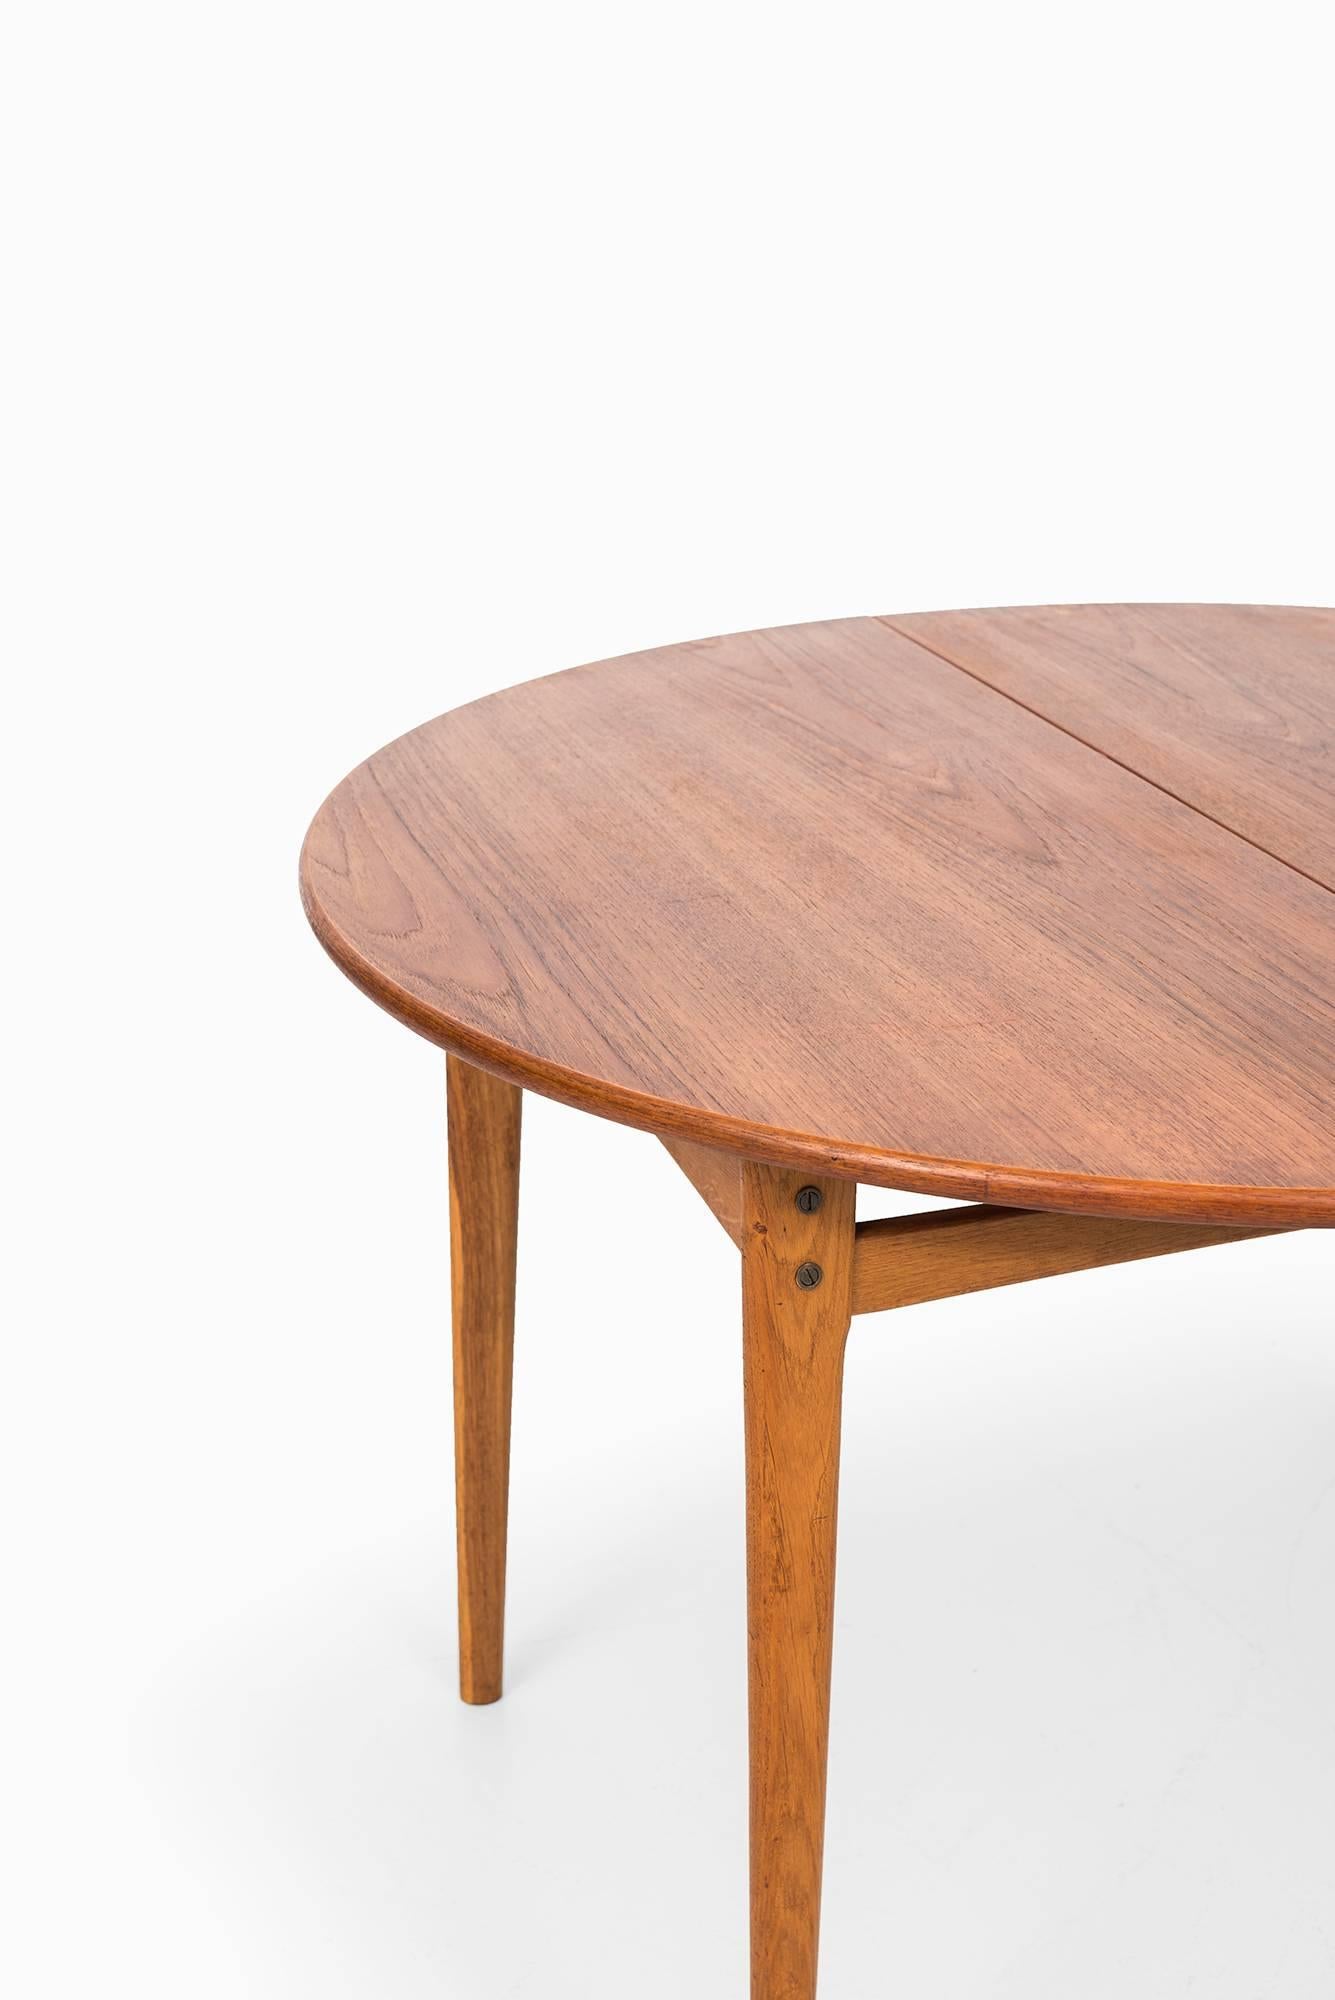 Brass Midcentury Dining Table in Oak with Teak Top 